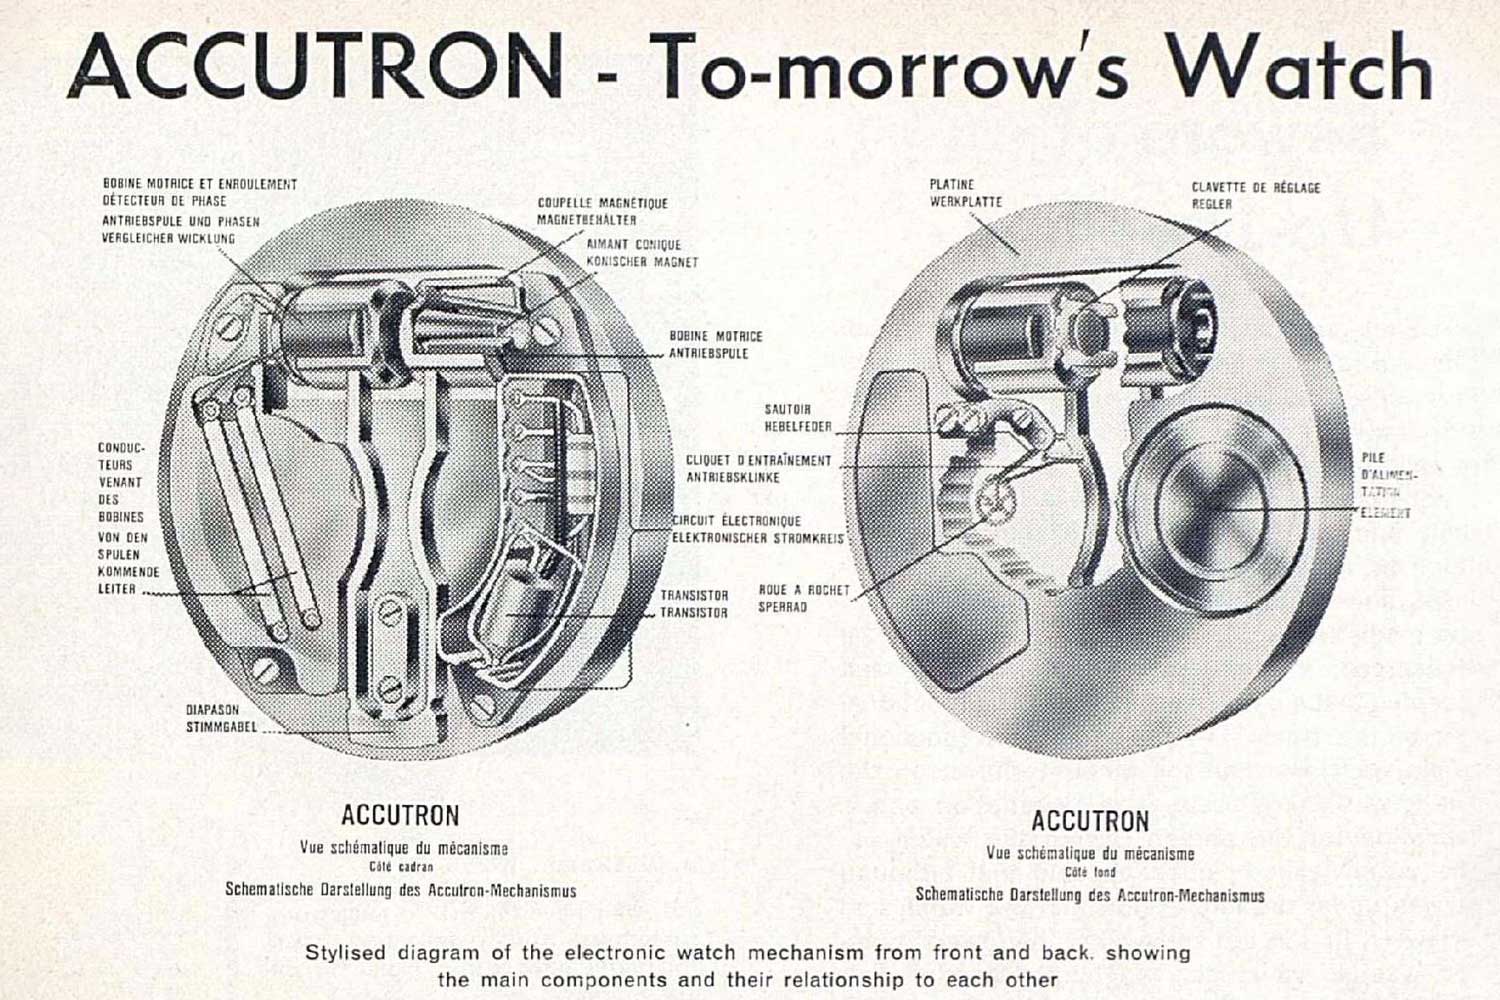 An old advertisement of Accutron